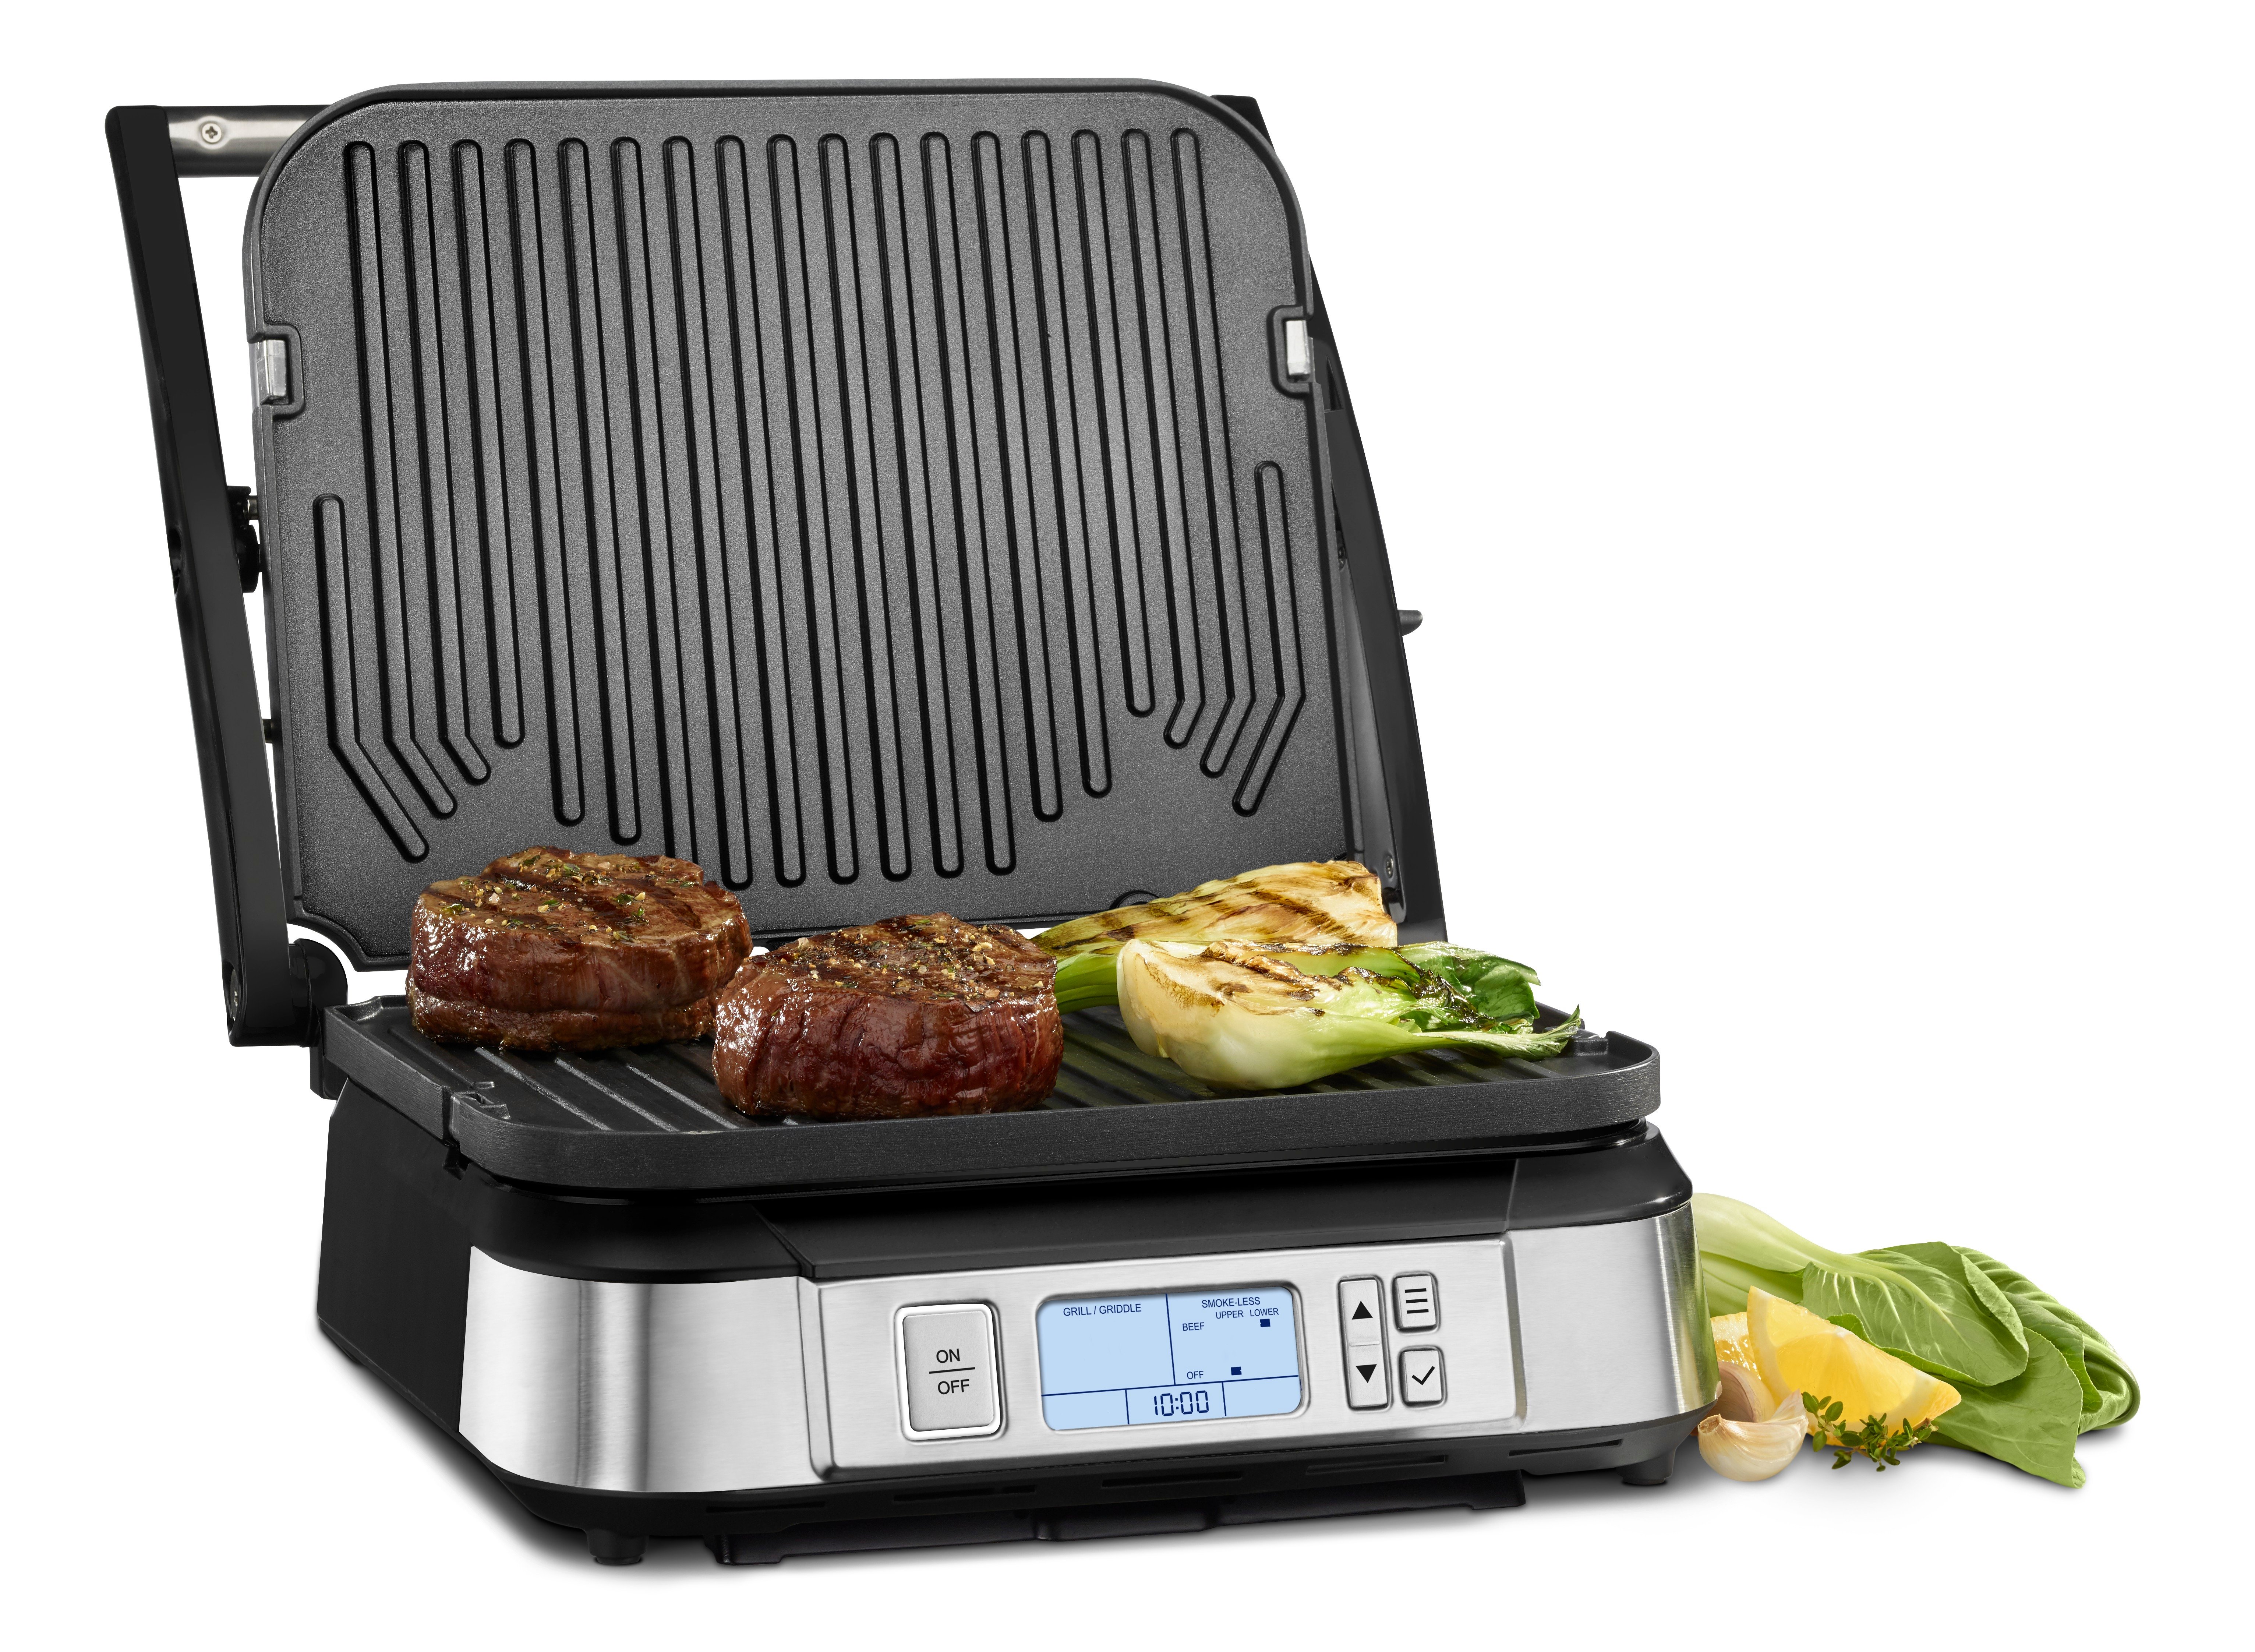 Discontinued Cuisinart Contact Griddler with Smoke-less Mode